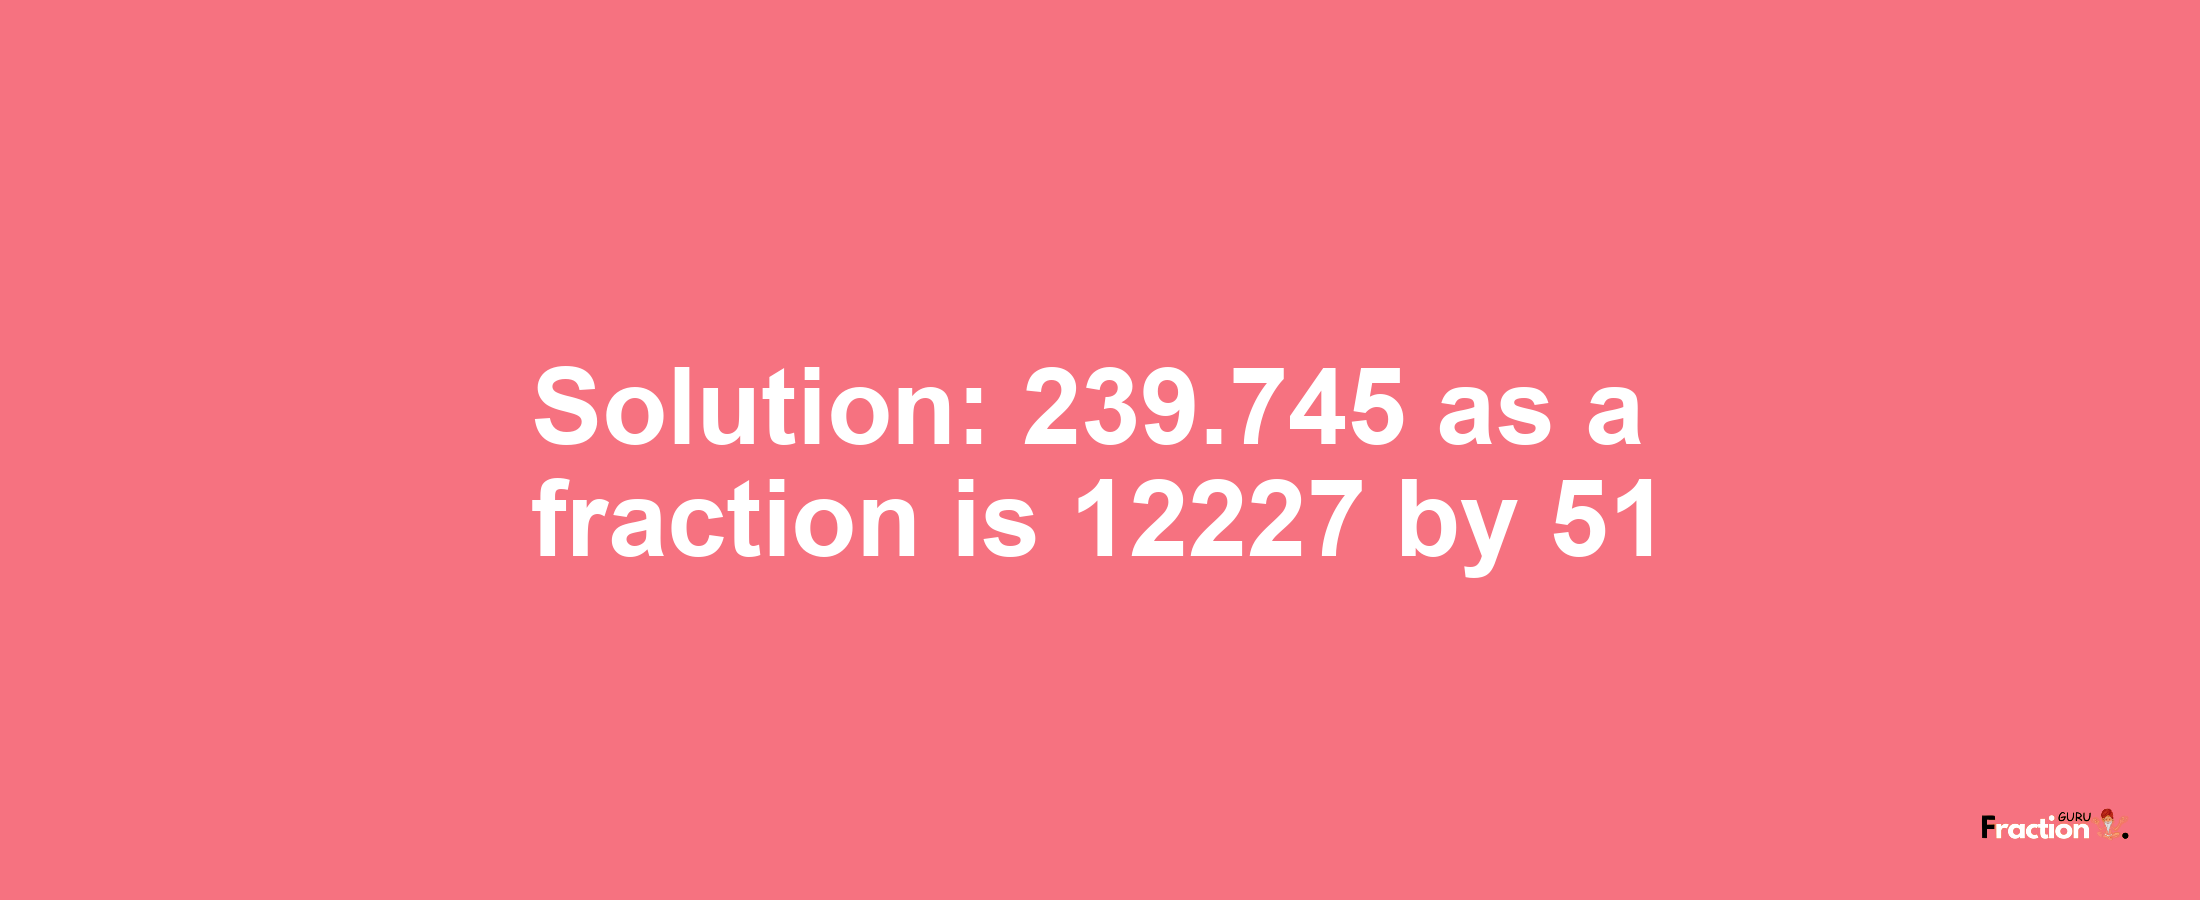 Solution:239.745 as a fraction is 12227/51